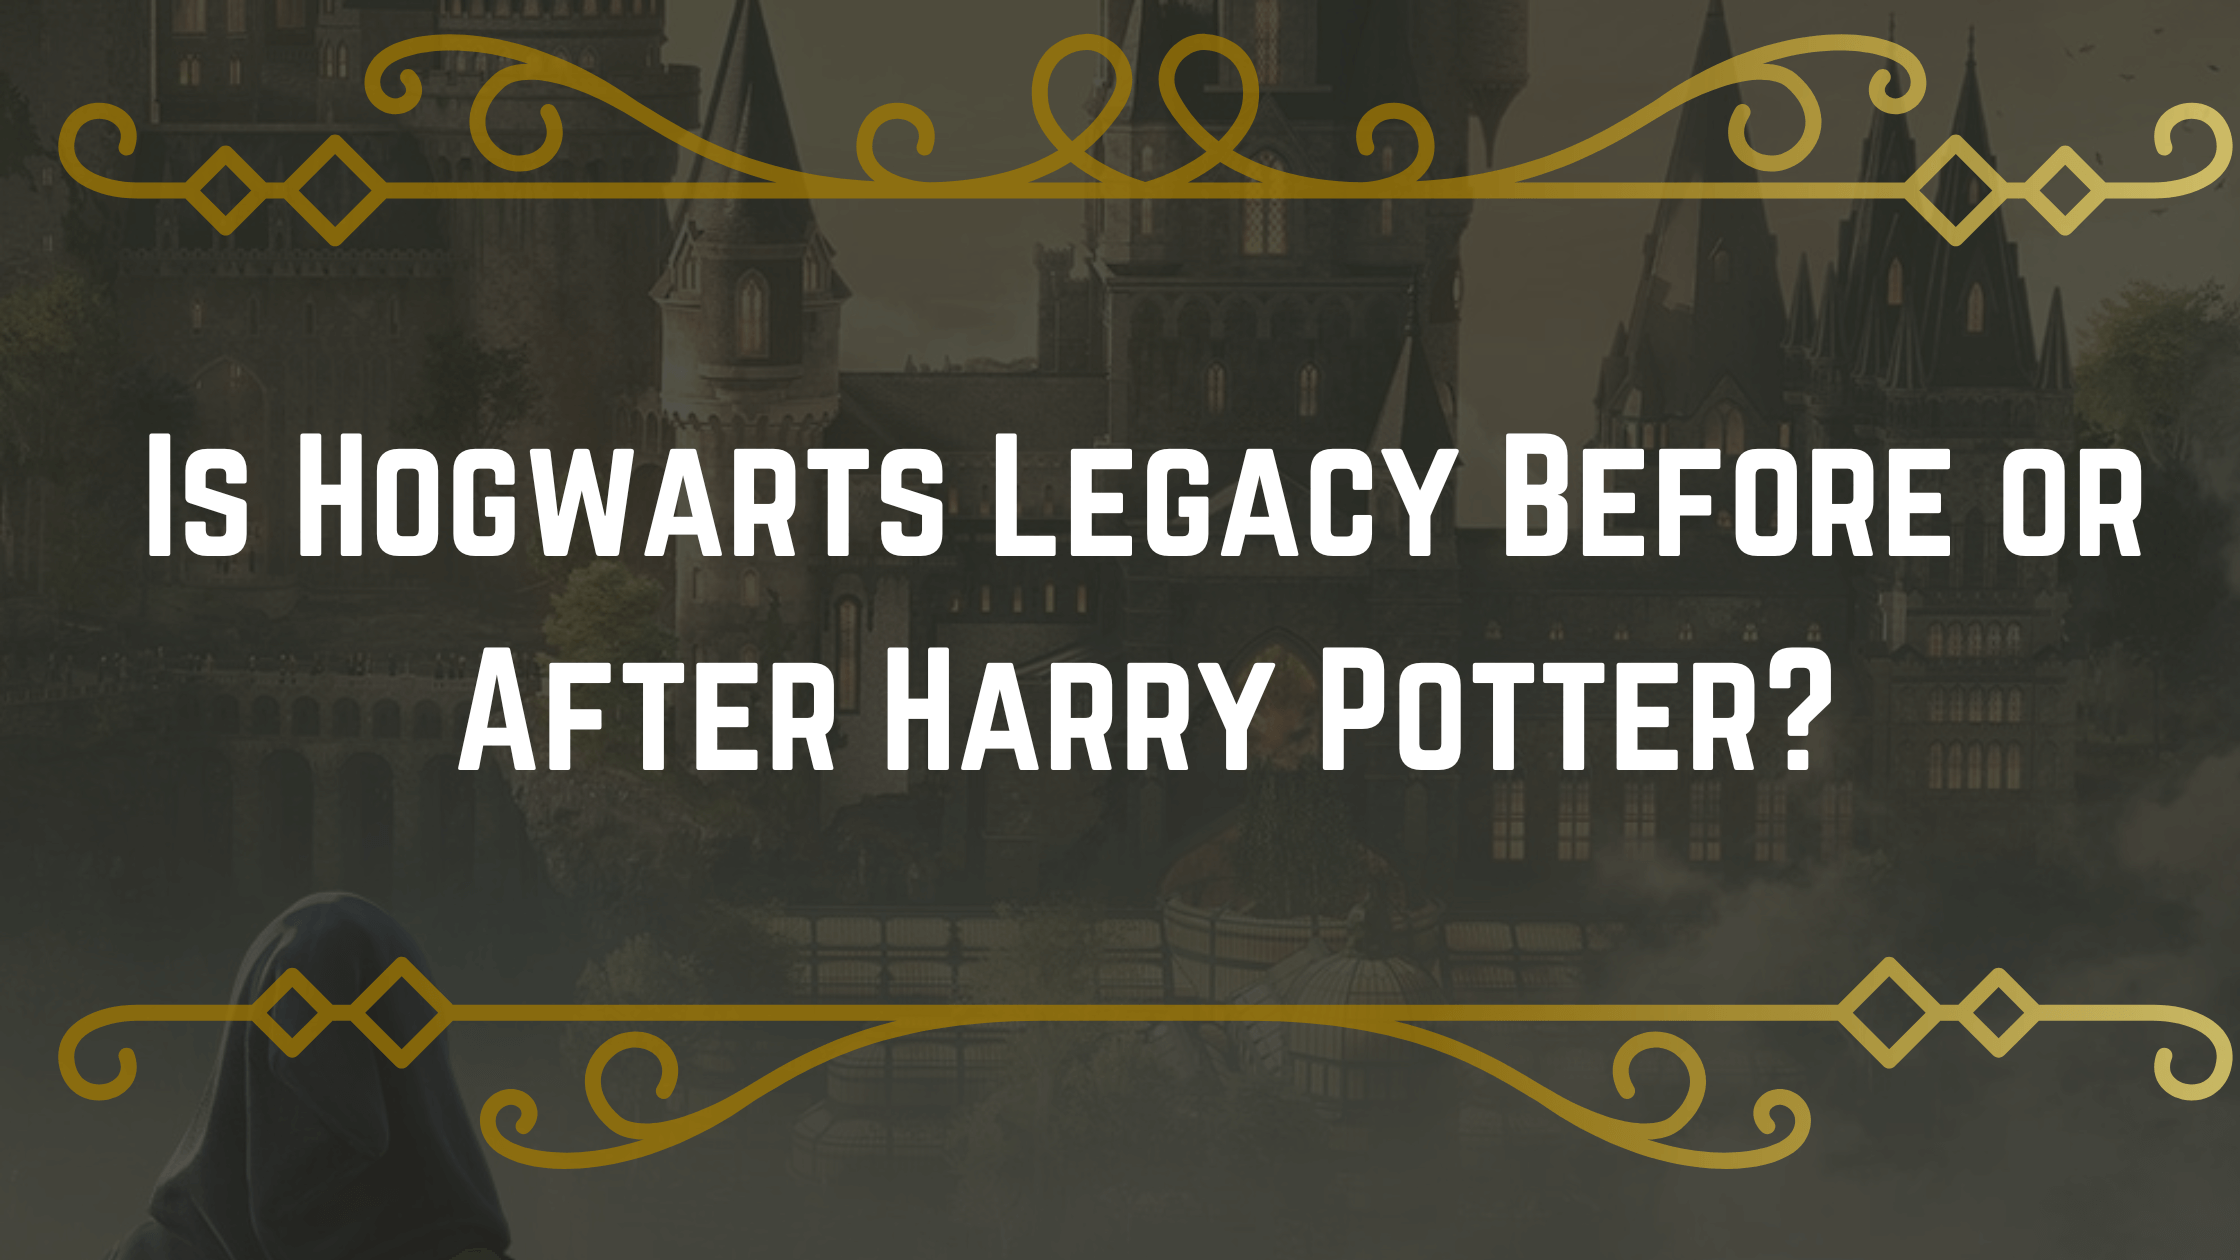 Does Hogwarts Legacy Before or After Harry Potter